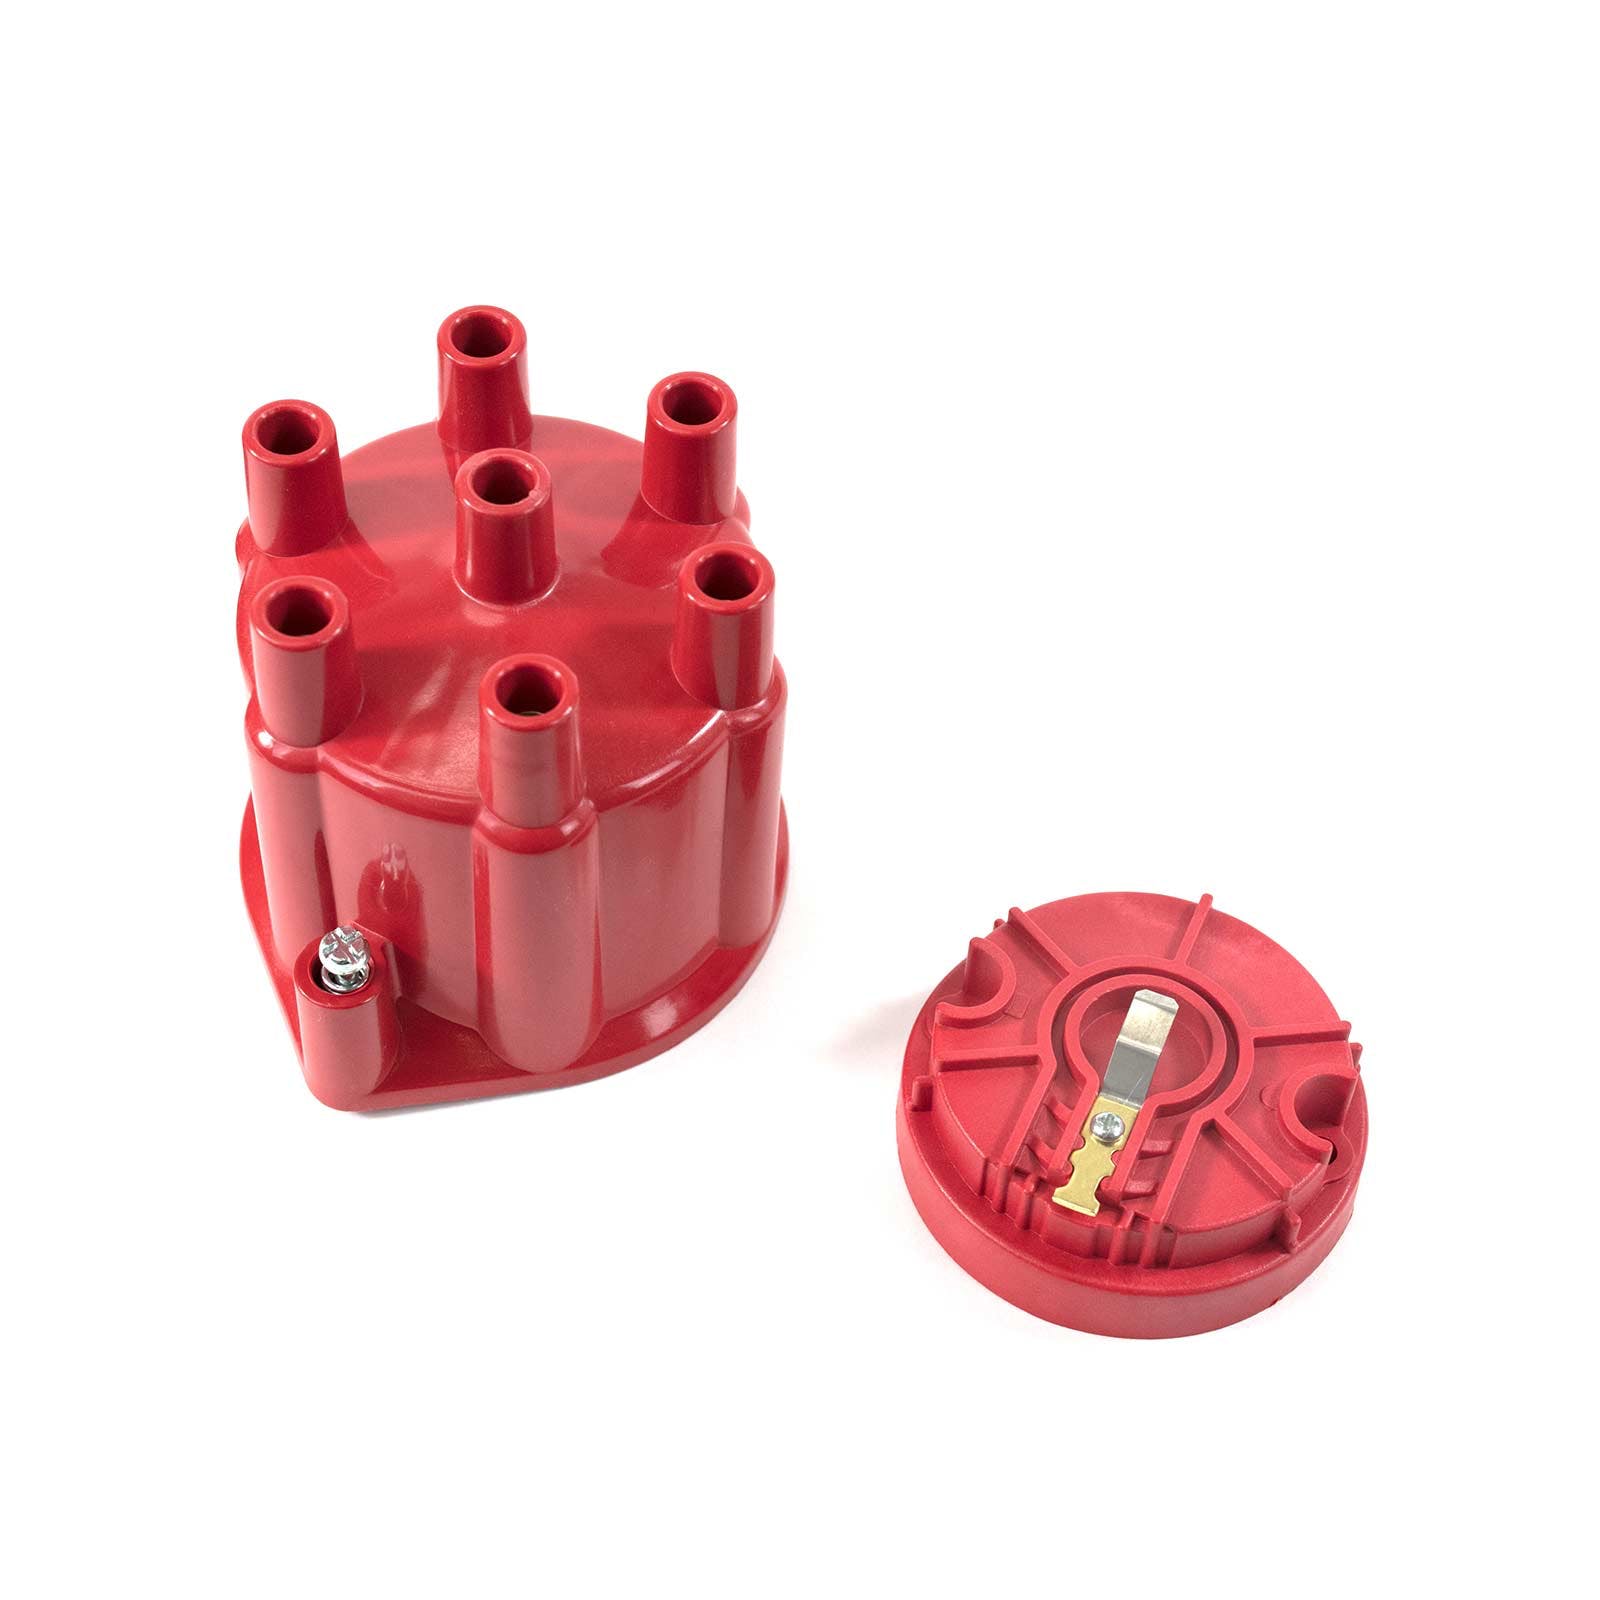 Top Street Performance JM6976R Pro Series Pro Billet Ready To Run Distributor Cap and Rotor Kit Red